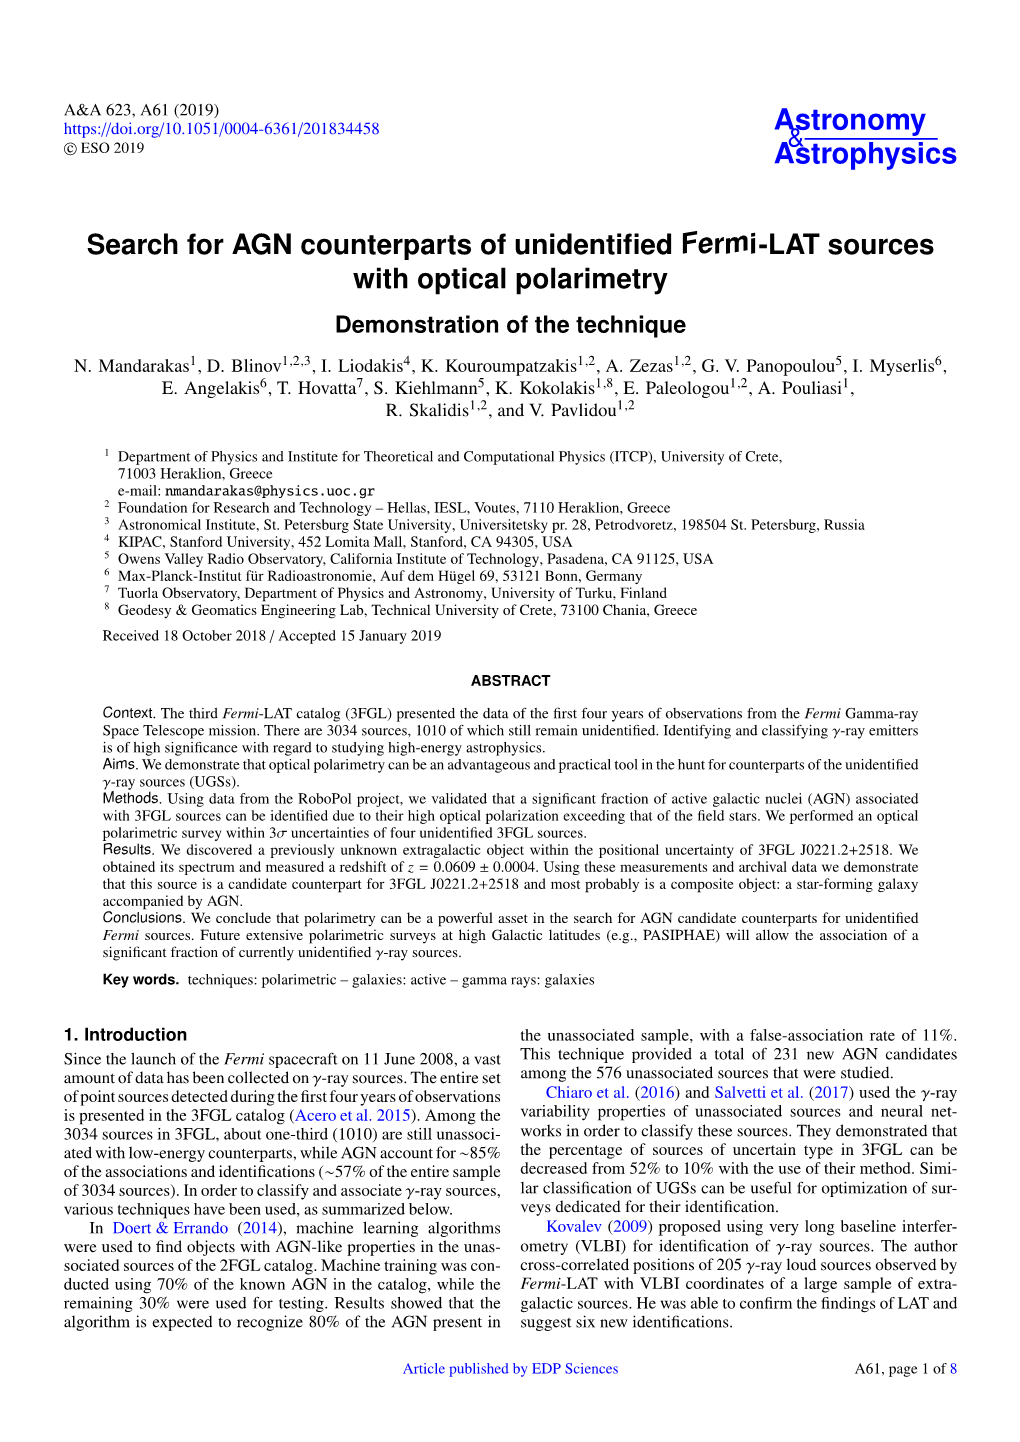 Search for AGN Counterparts of Unidentified Fermi-LAT Sources With